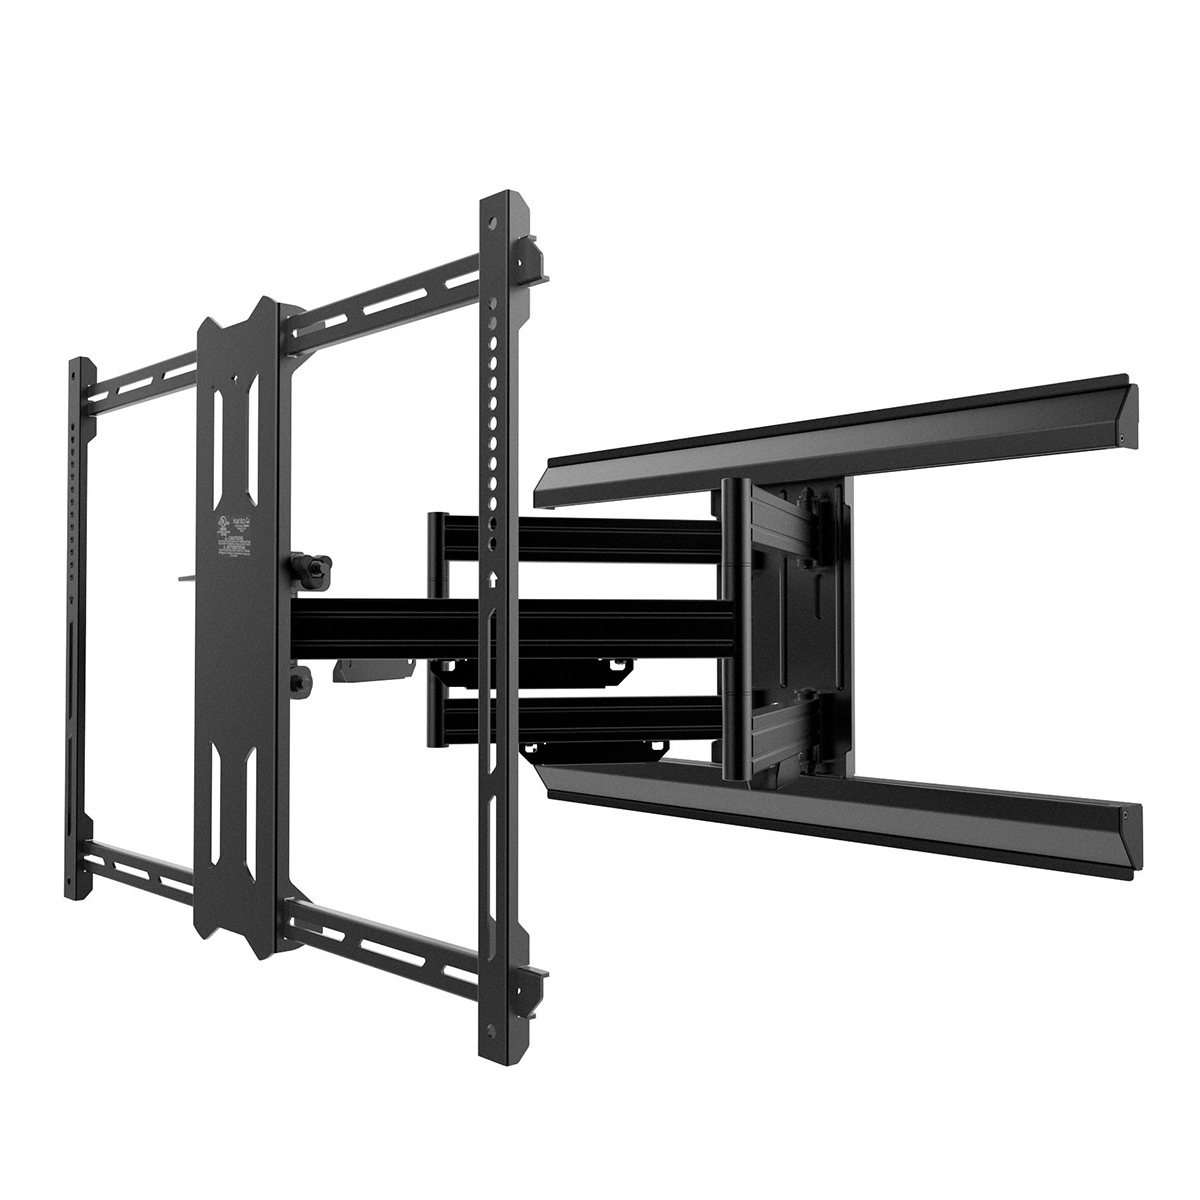 Kanto PMX700 Articulating Full Motion Mount for 42" - 100" TV - image 1 of 8